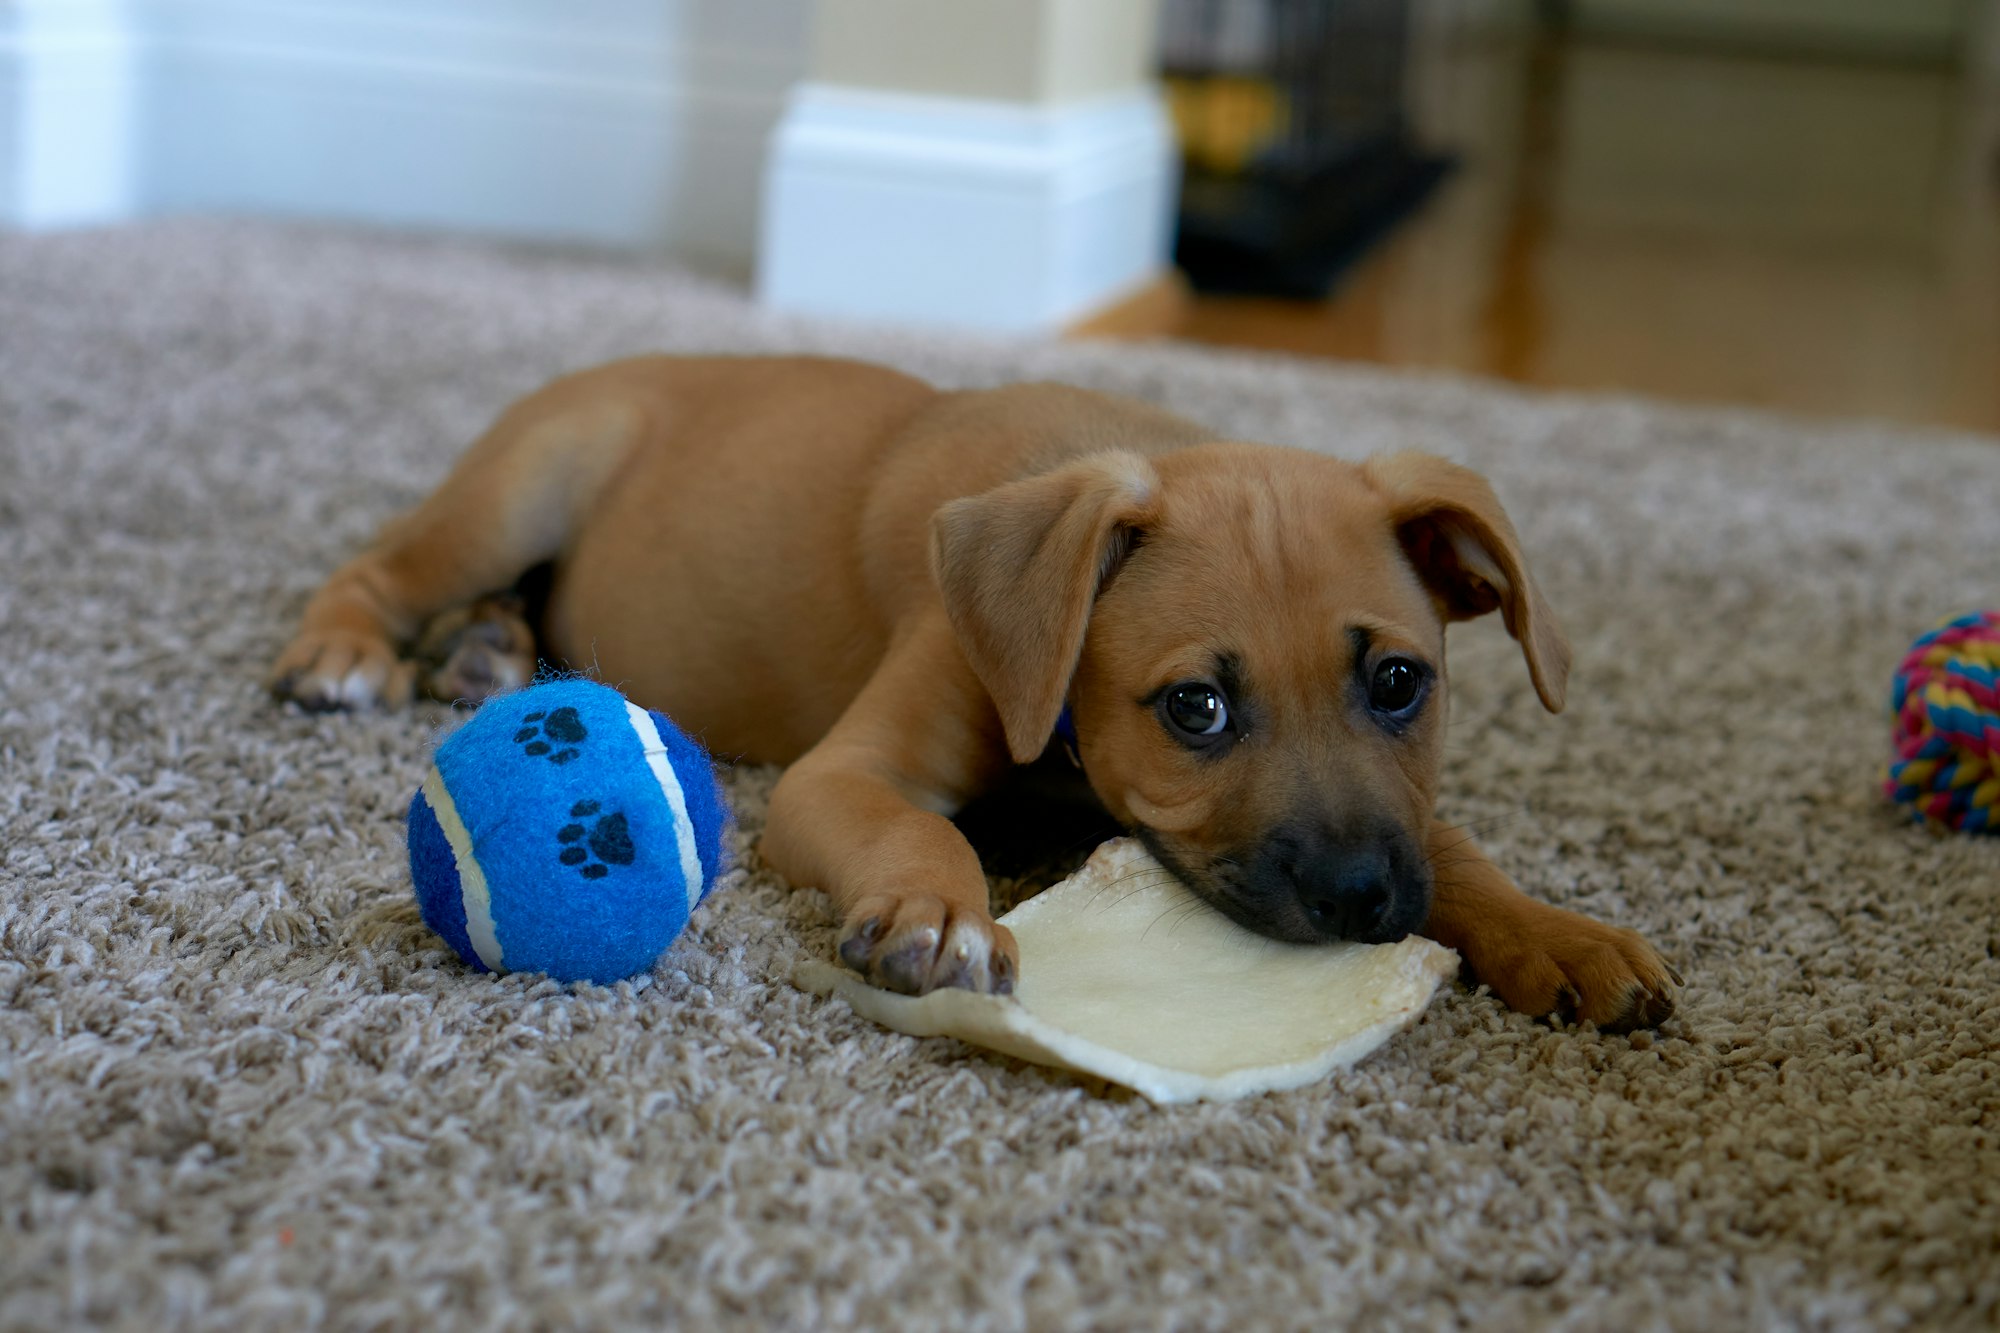 Puppy playing with toys.